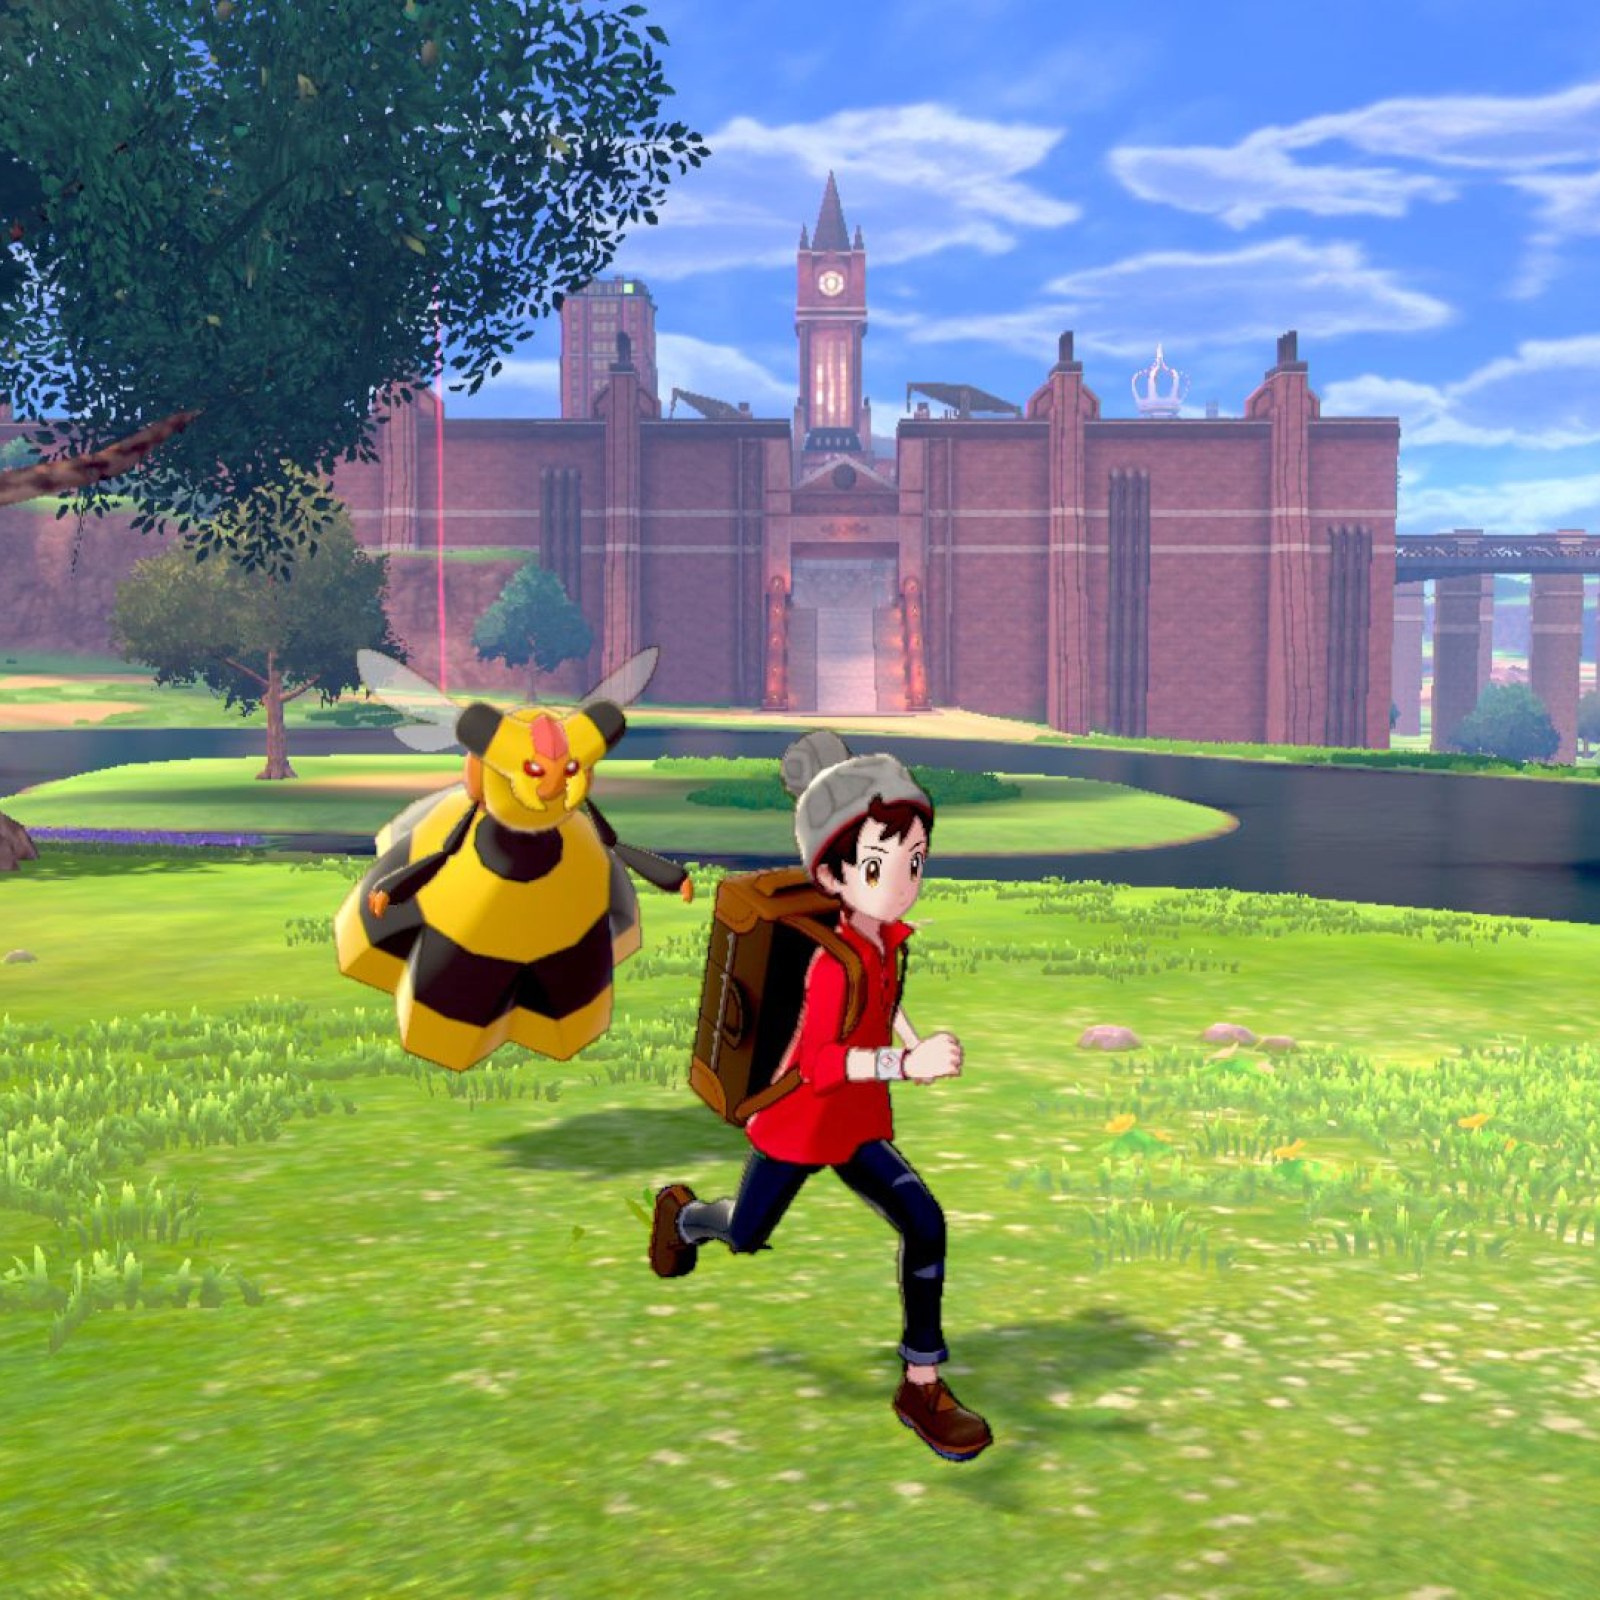 E3 2019: Pokemon Sword & Shield - Everything We Know And What We